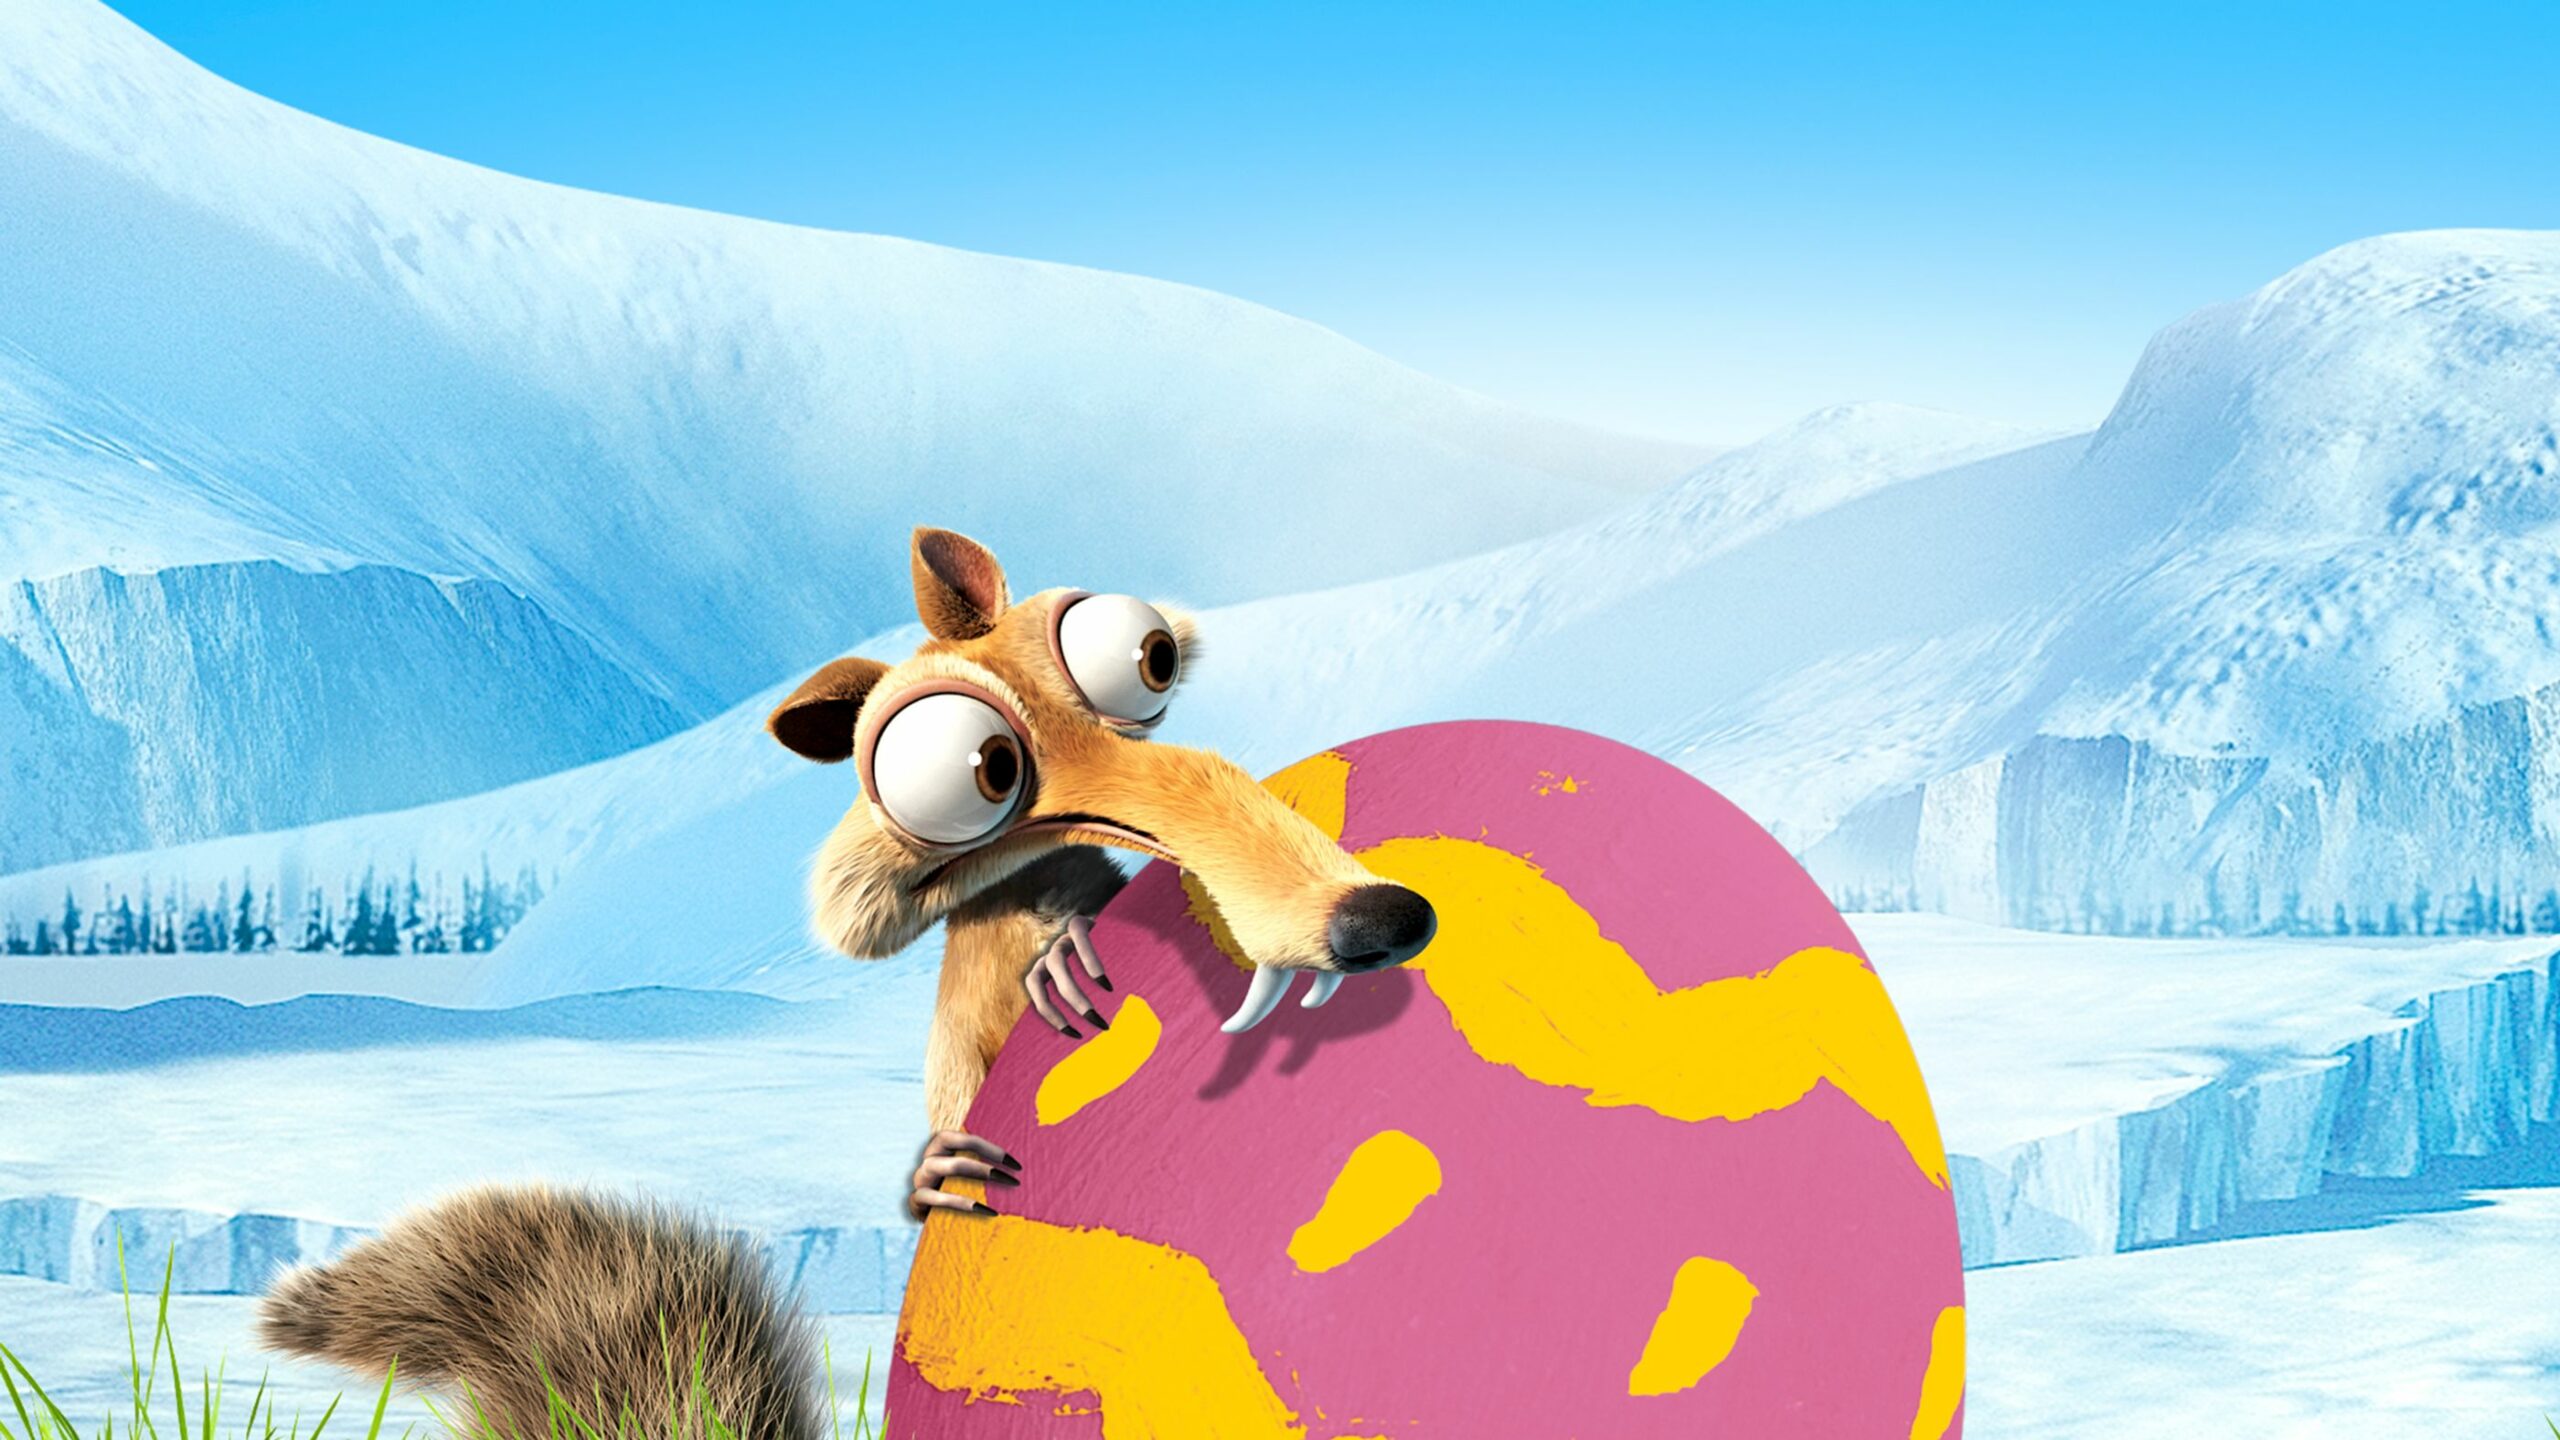 Scrat is looking at an Easter egg.